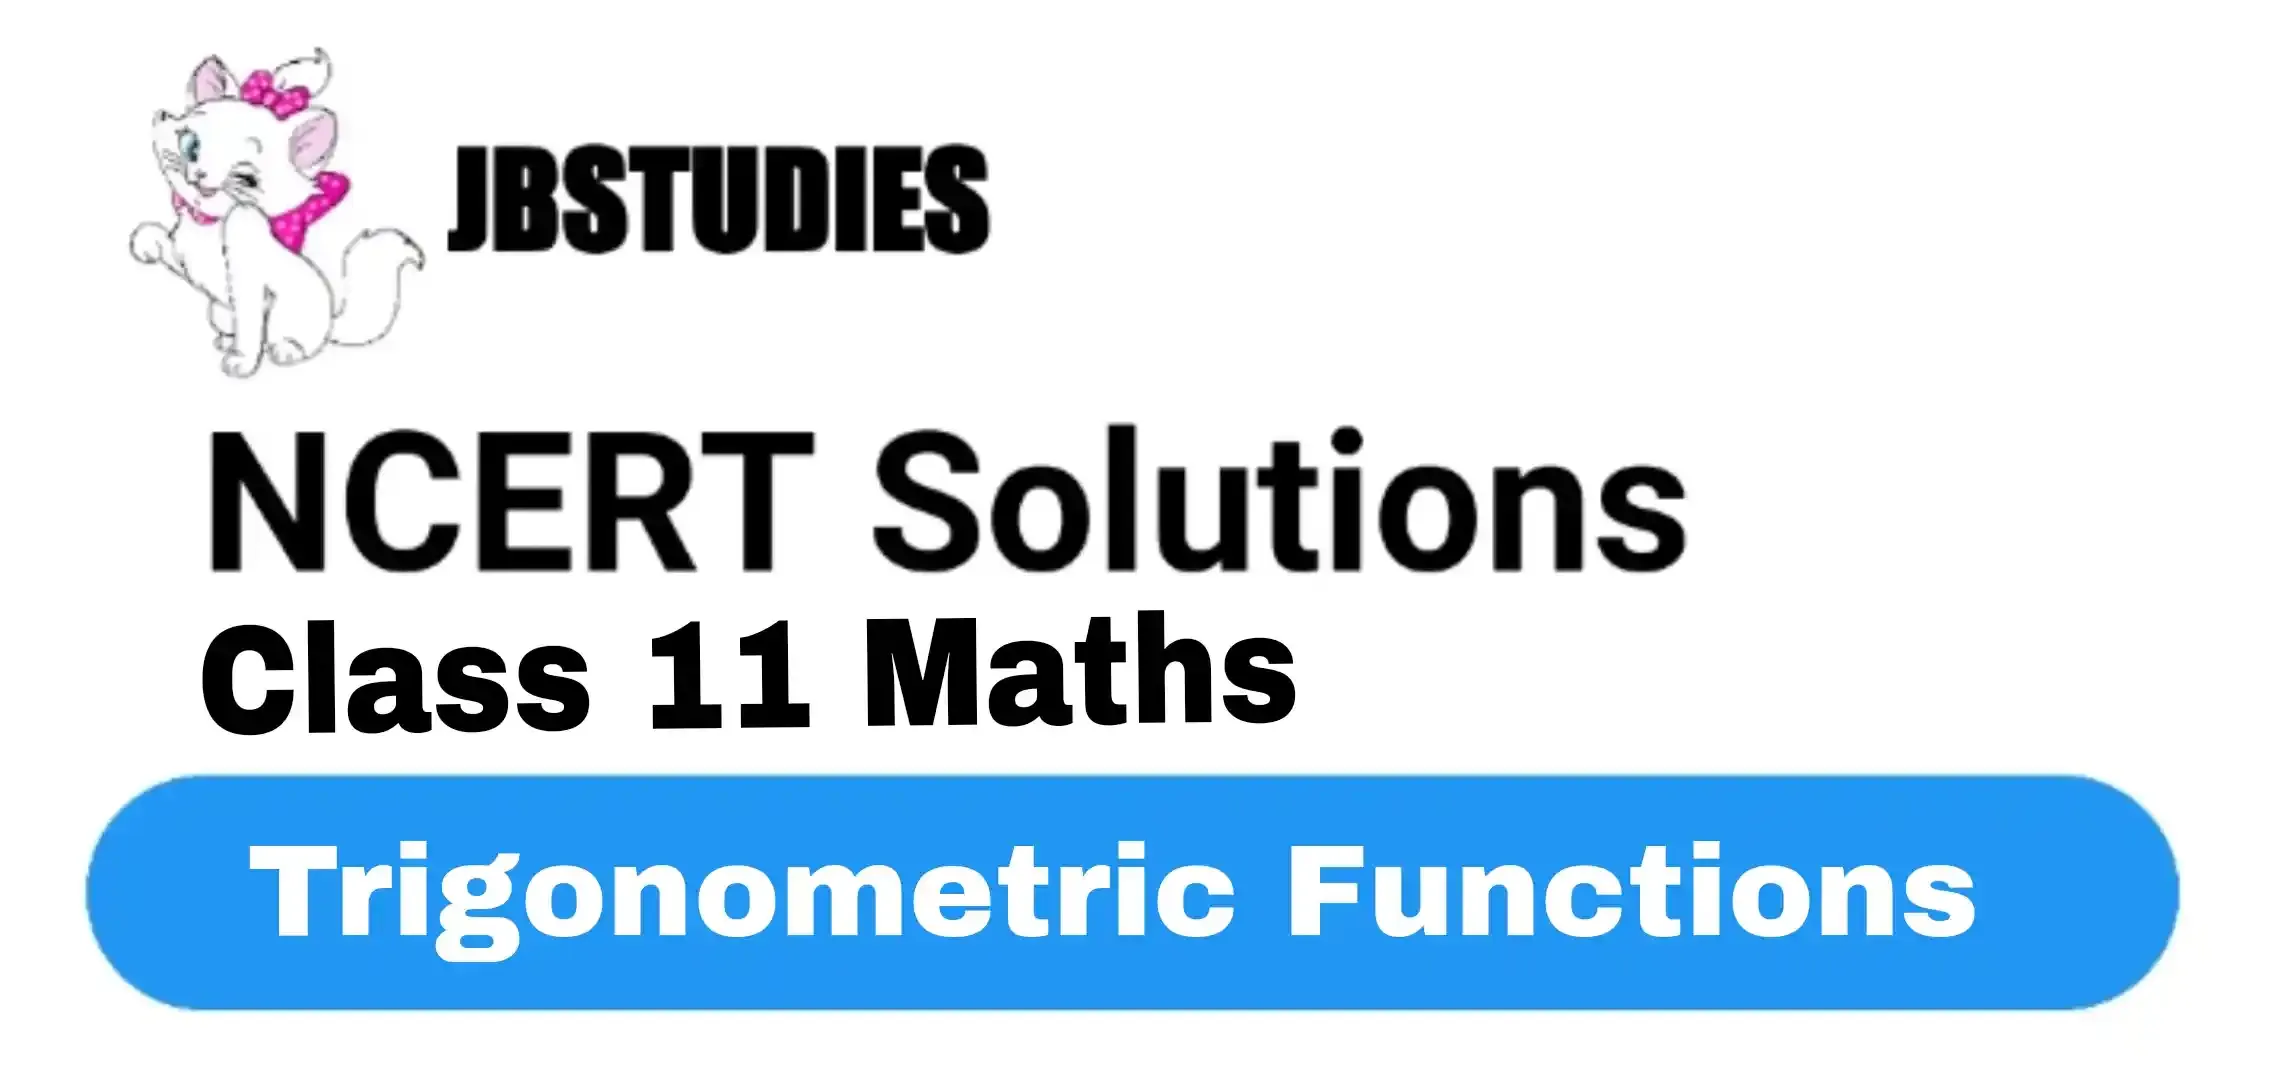 Solutions Class 11 Maths Chapter-3 (Trigonometric Functions)